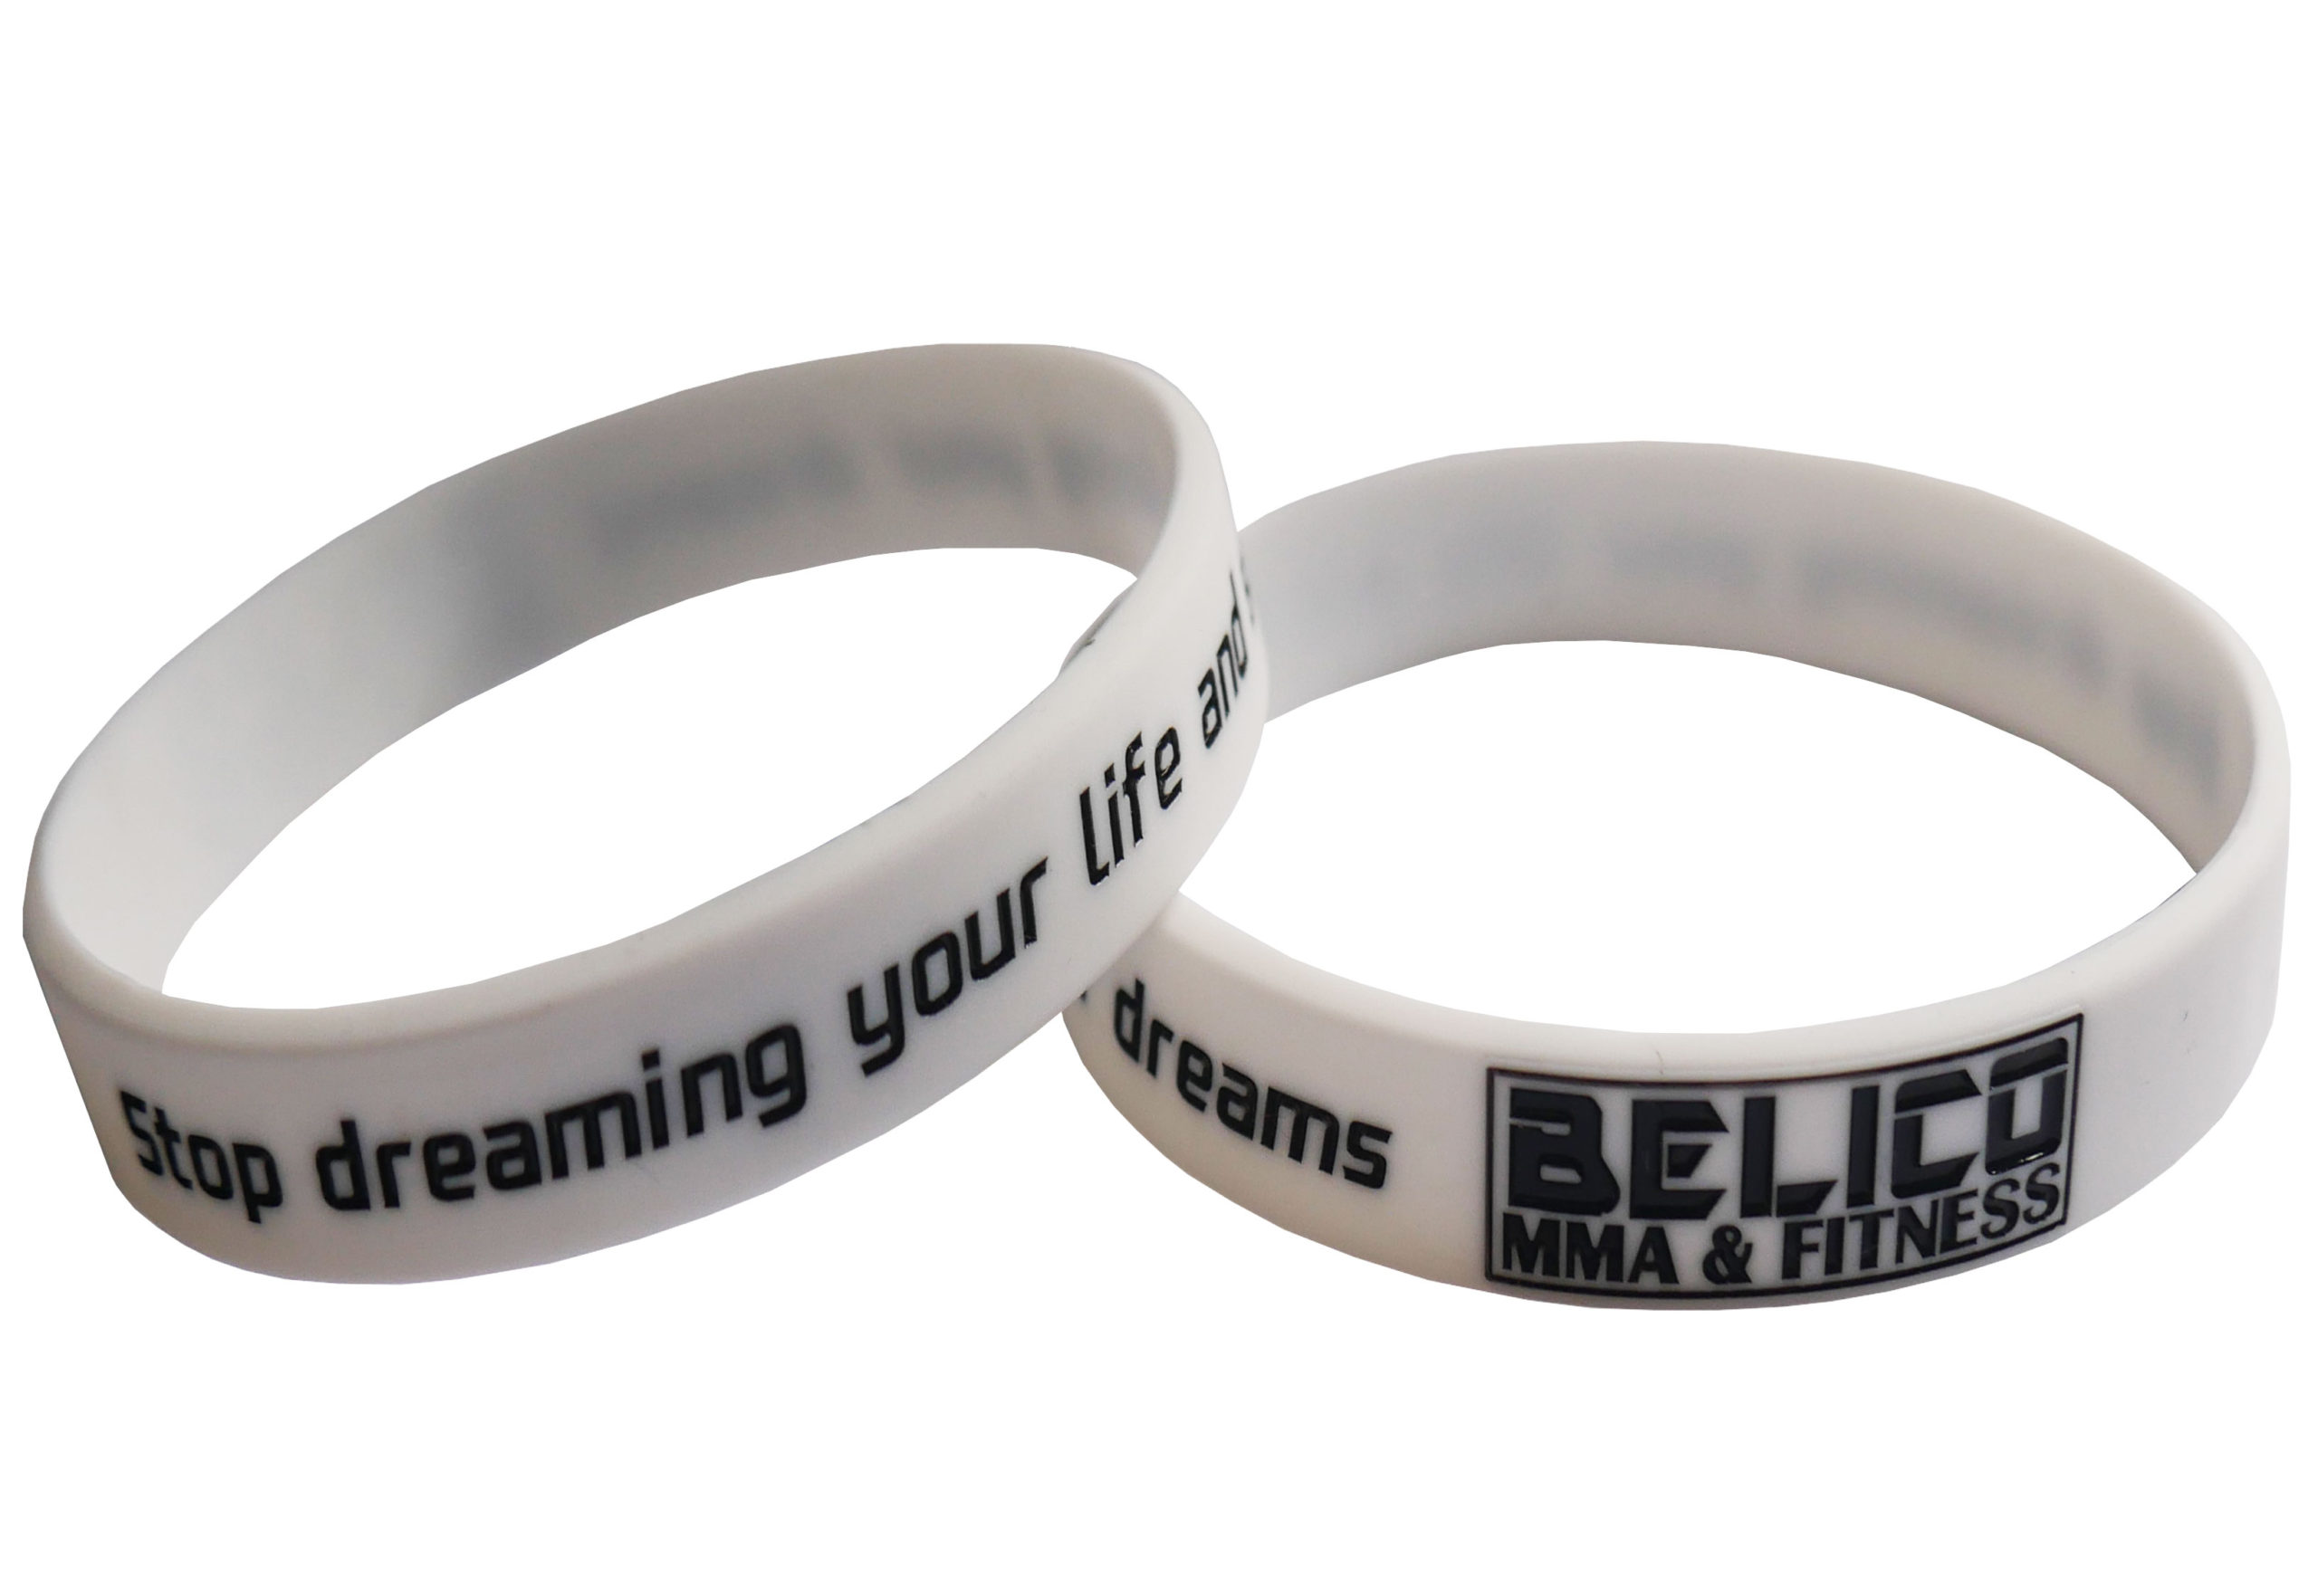 Customized Silicone Wristbands, Silicone Rubber Bracelet - STARLING Silicone